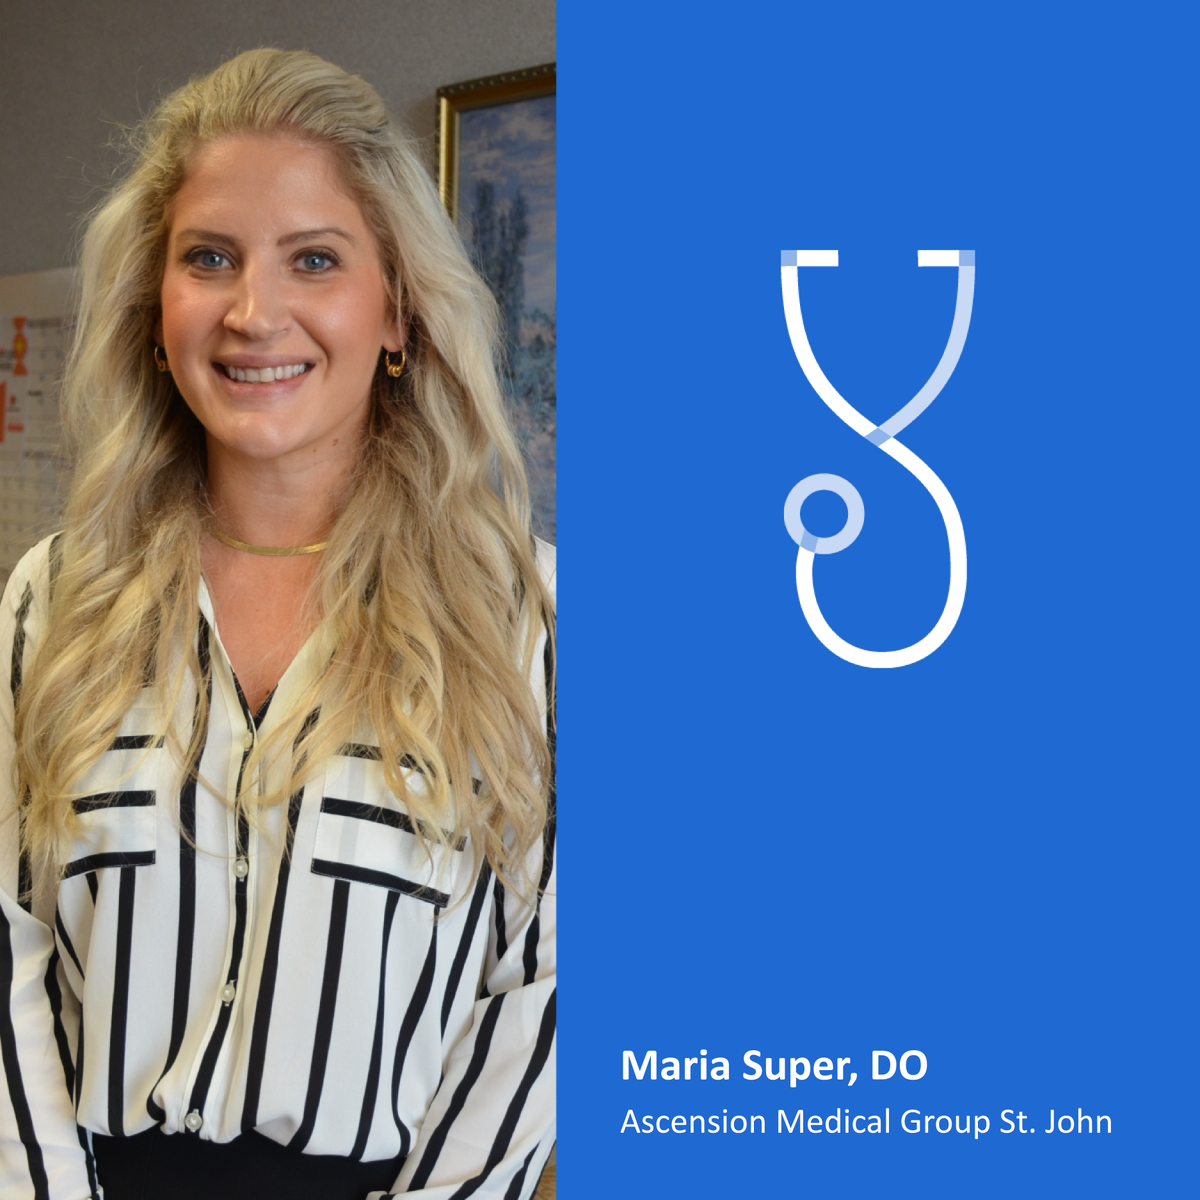 🧠 Meet your Stroke Team! 🧠 Maria Super, DO, is passionate about her work - providing quality care to patients. “Good and meaningful work perfects you as a person. Work causes you to gain virtues that you would not get without work,” Maria says.